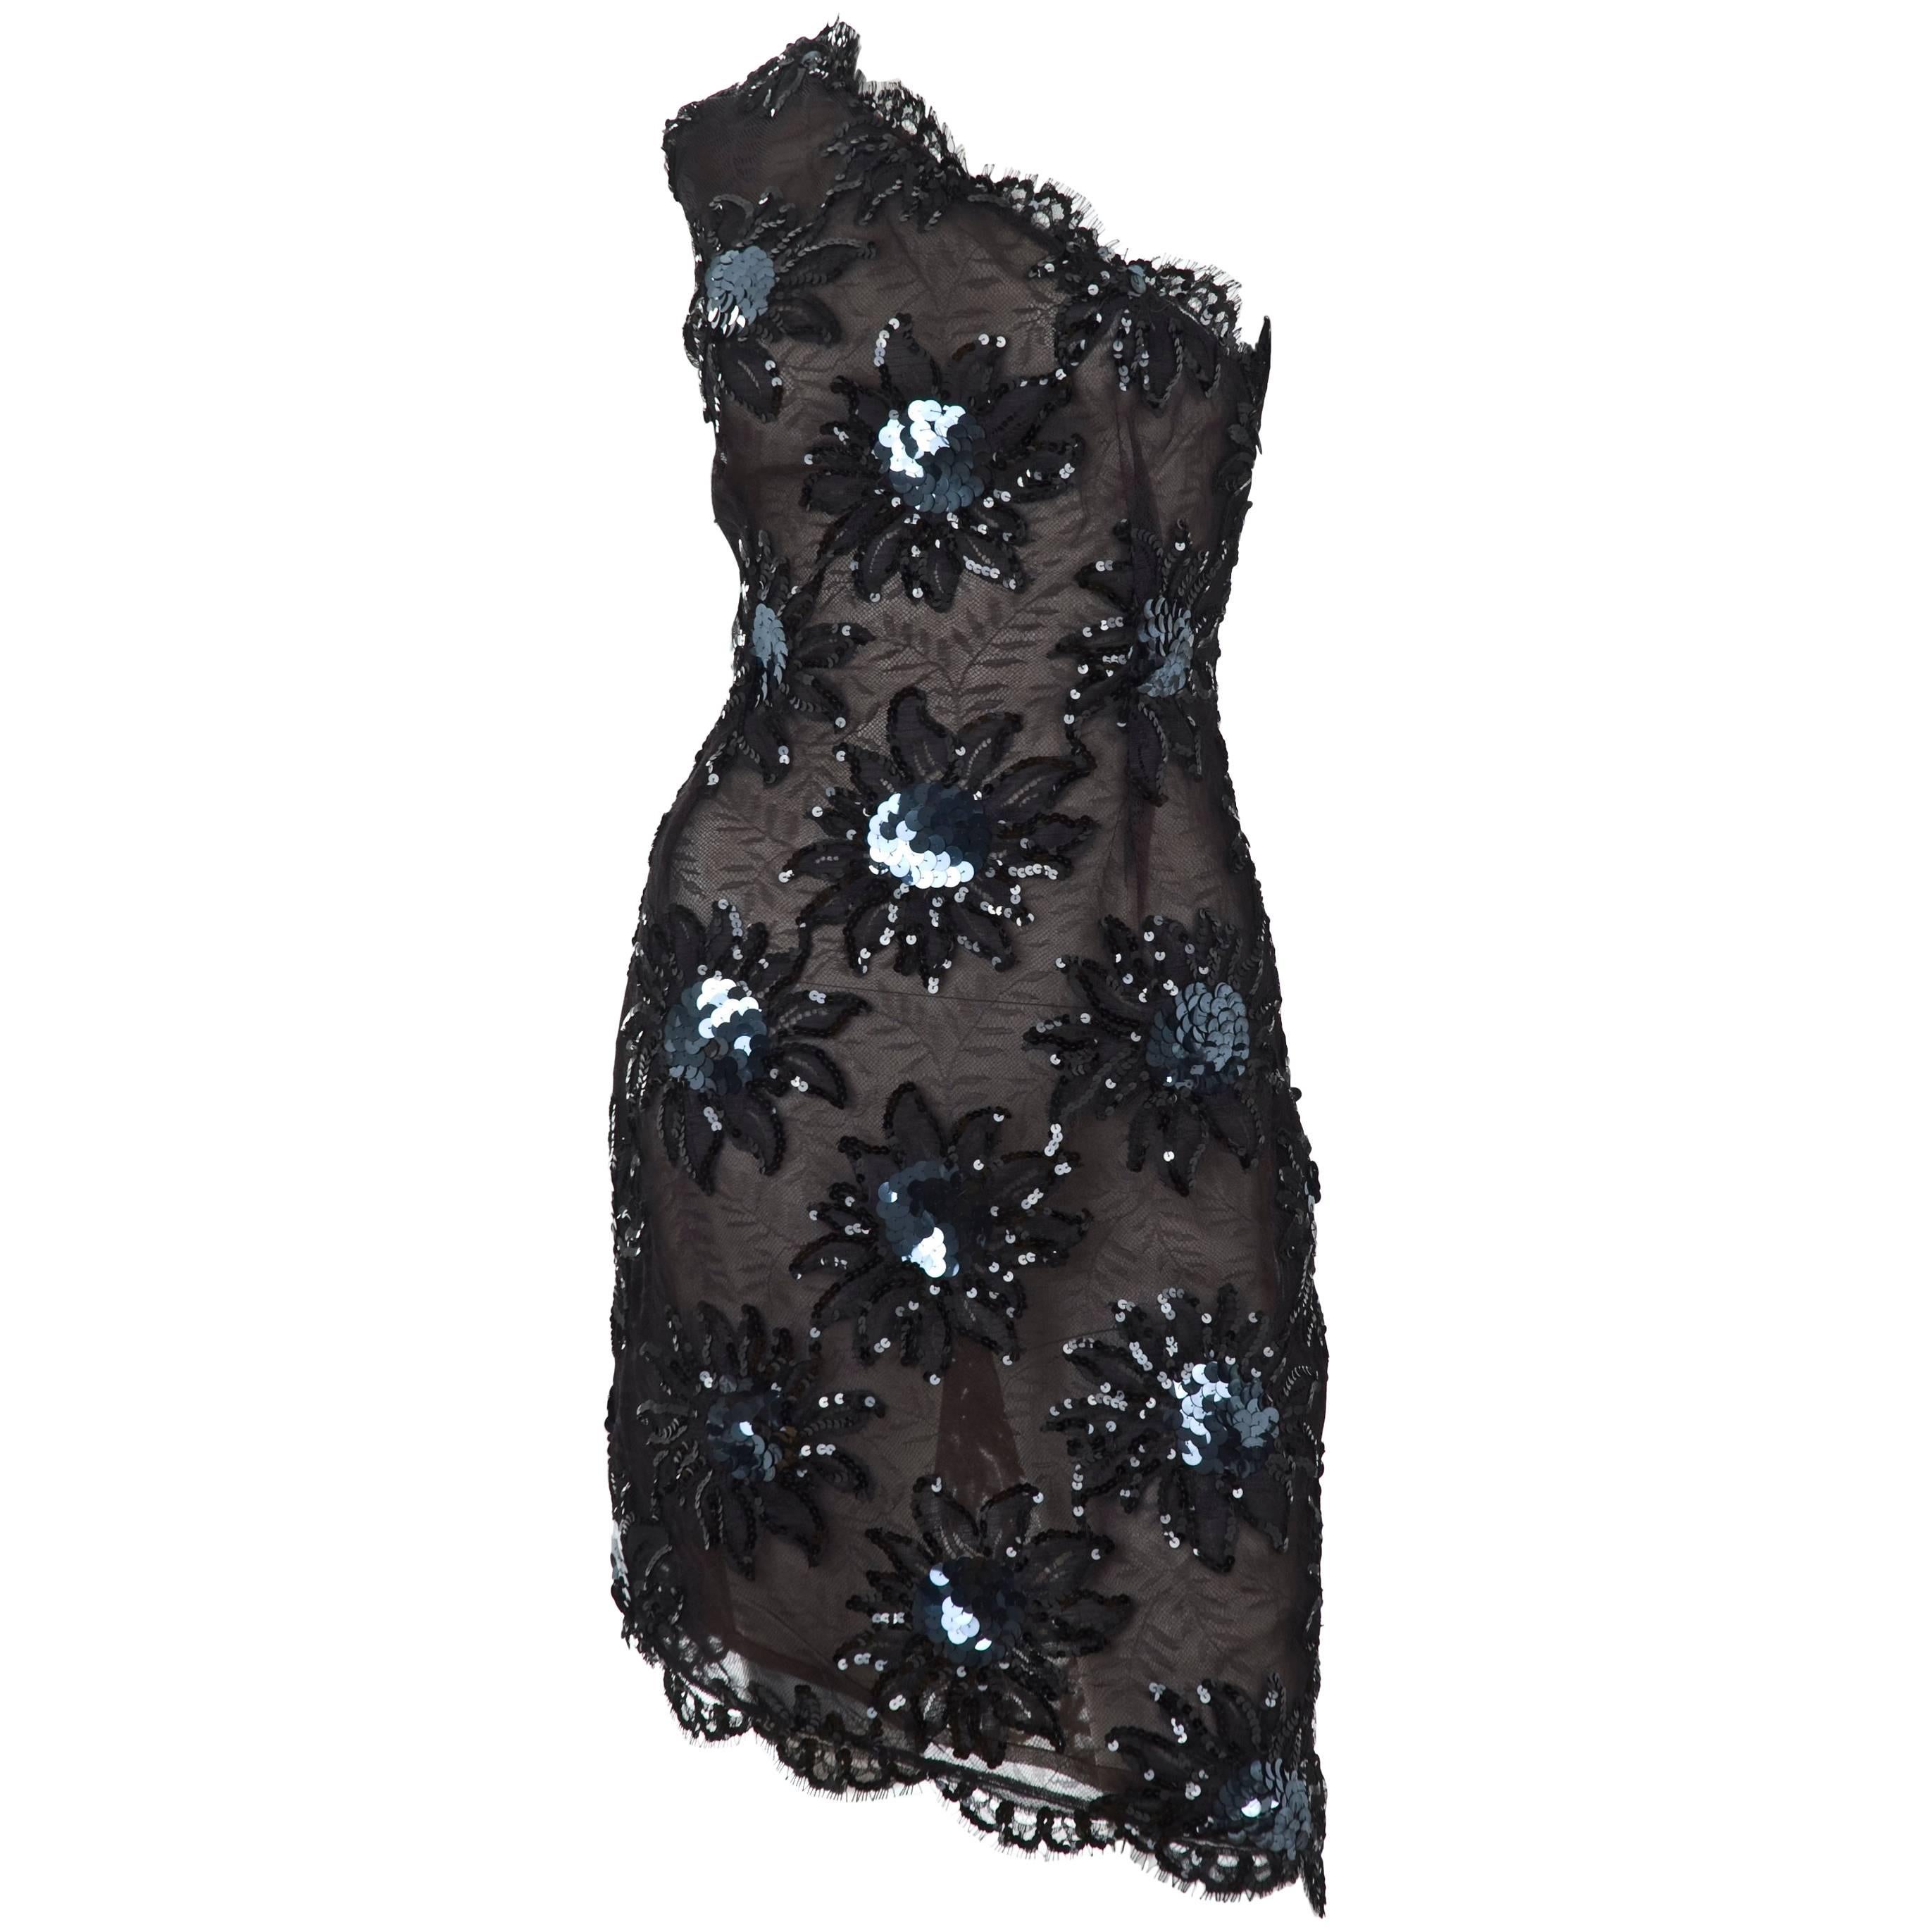 1987 Rare Yves Saint Laurent Cocktail Dress in Black Lace and Sequins  For Sale